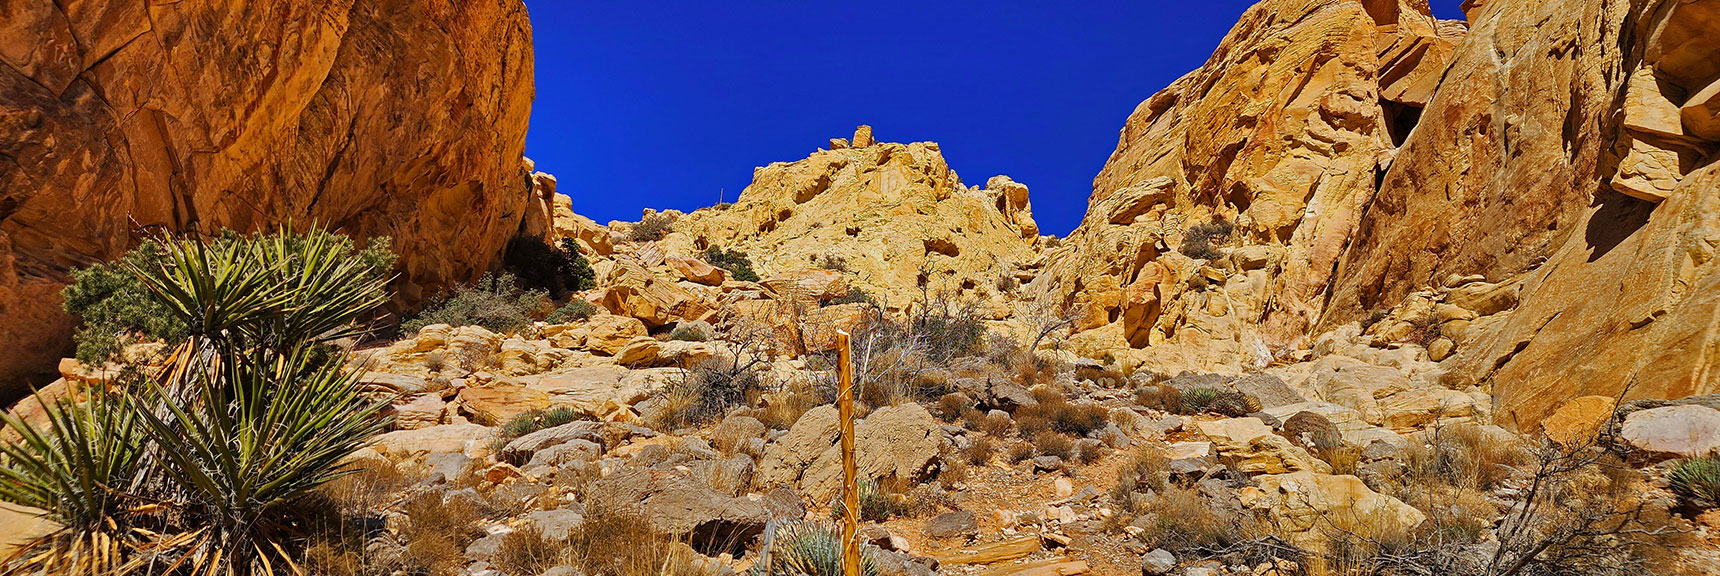 Lighter Sandstone, Smaller Easy Boulders Above. | Upper Calico Hills Loop | Calico Basin and Red Rock Canyon, Nevada